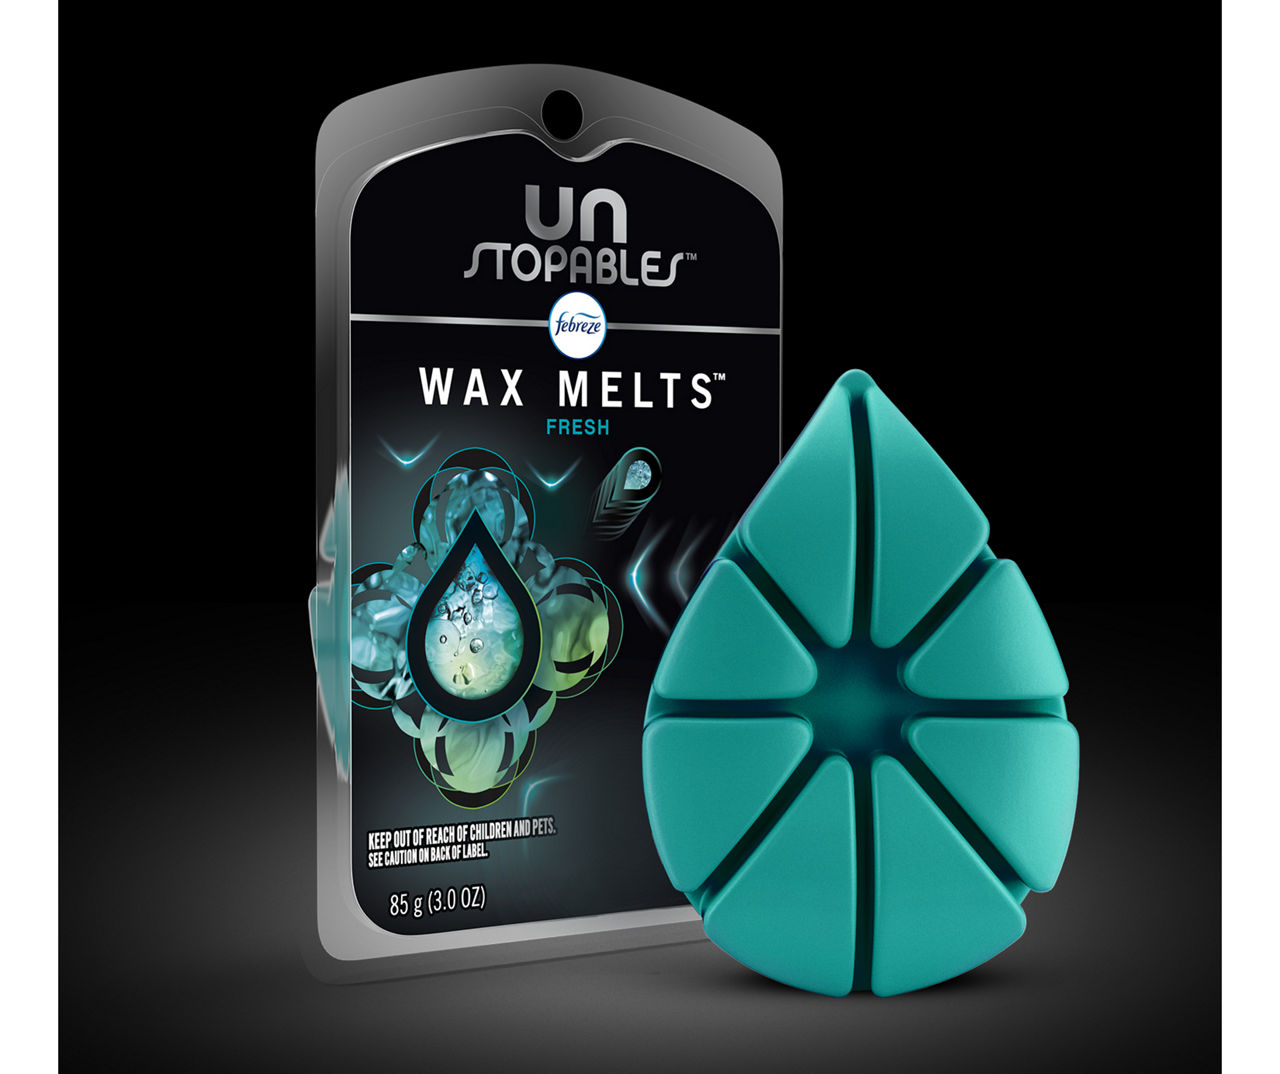 UN STOPABLES WAX WAX MELTS Product description Original Version Honey, we  already know you're unstoppable and your scented wax melt air fresheners  should be too. That's why you shouldn't settle for anything